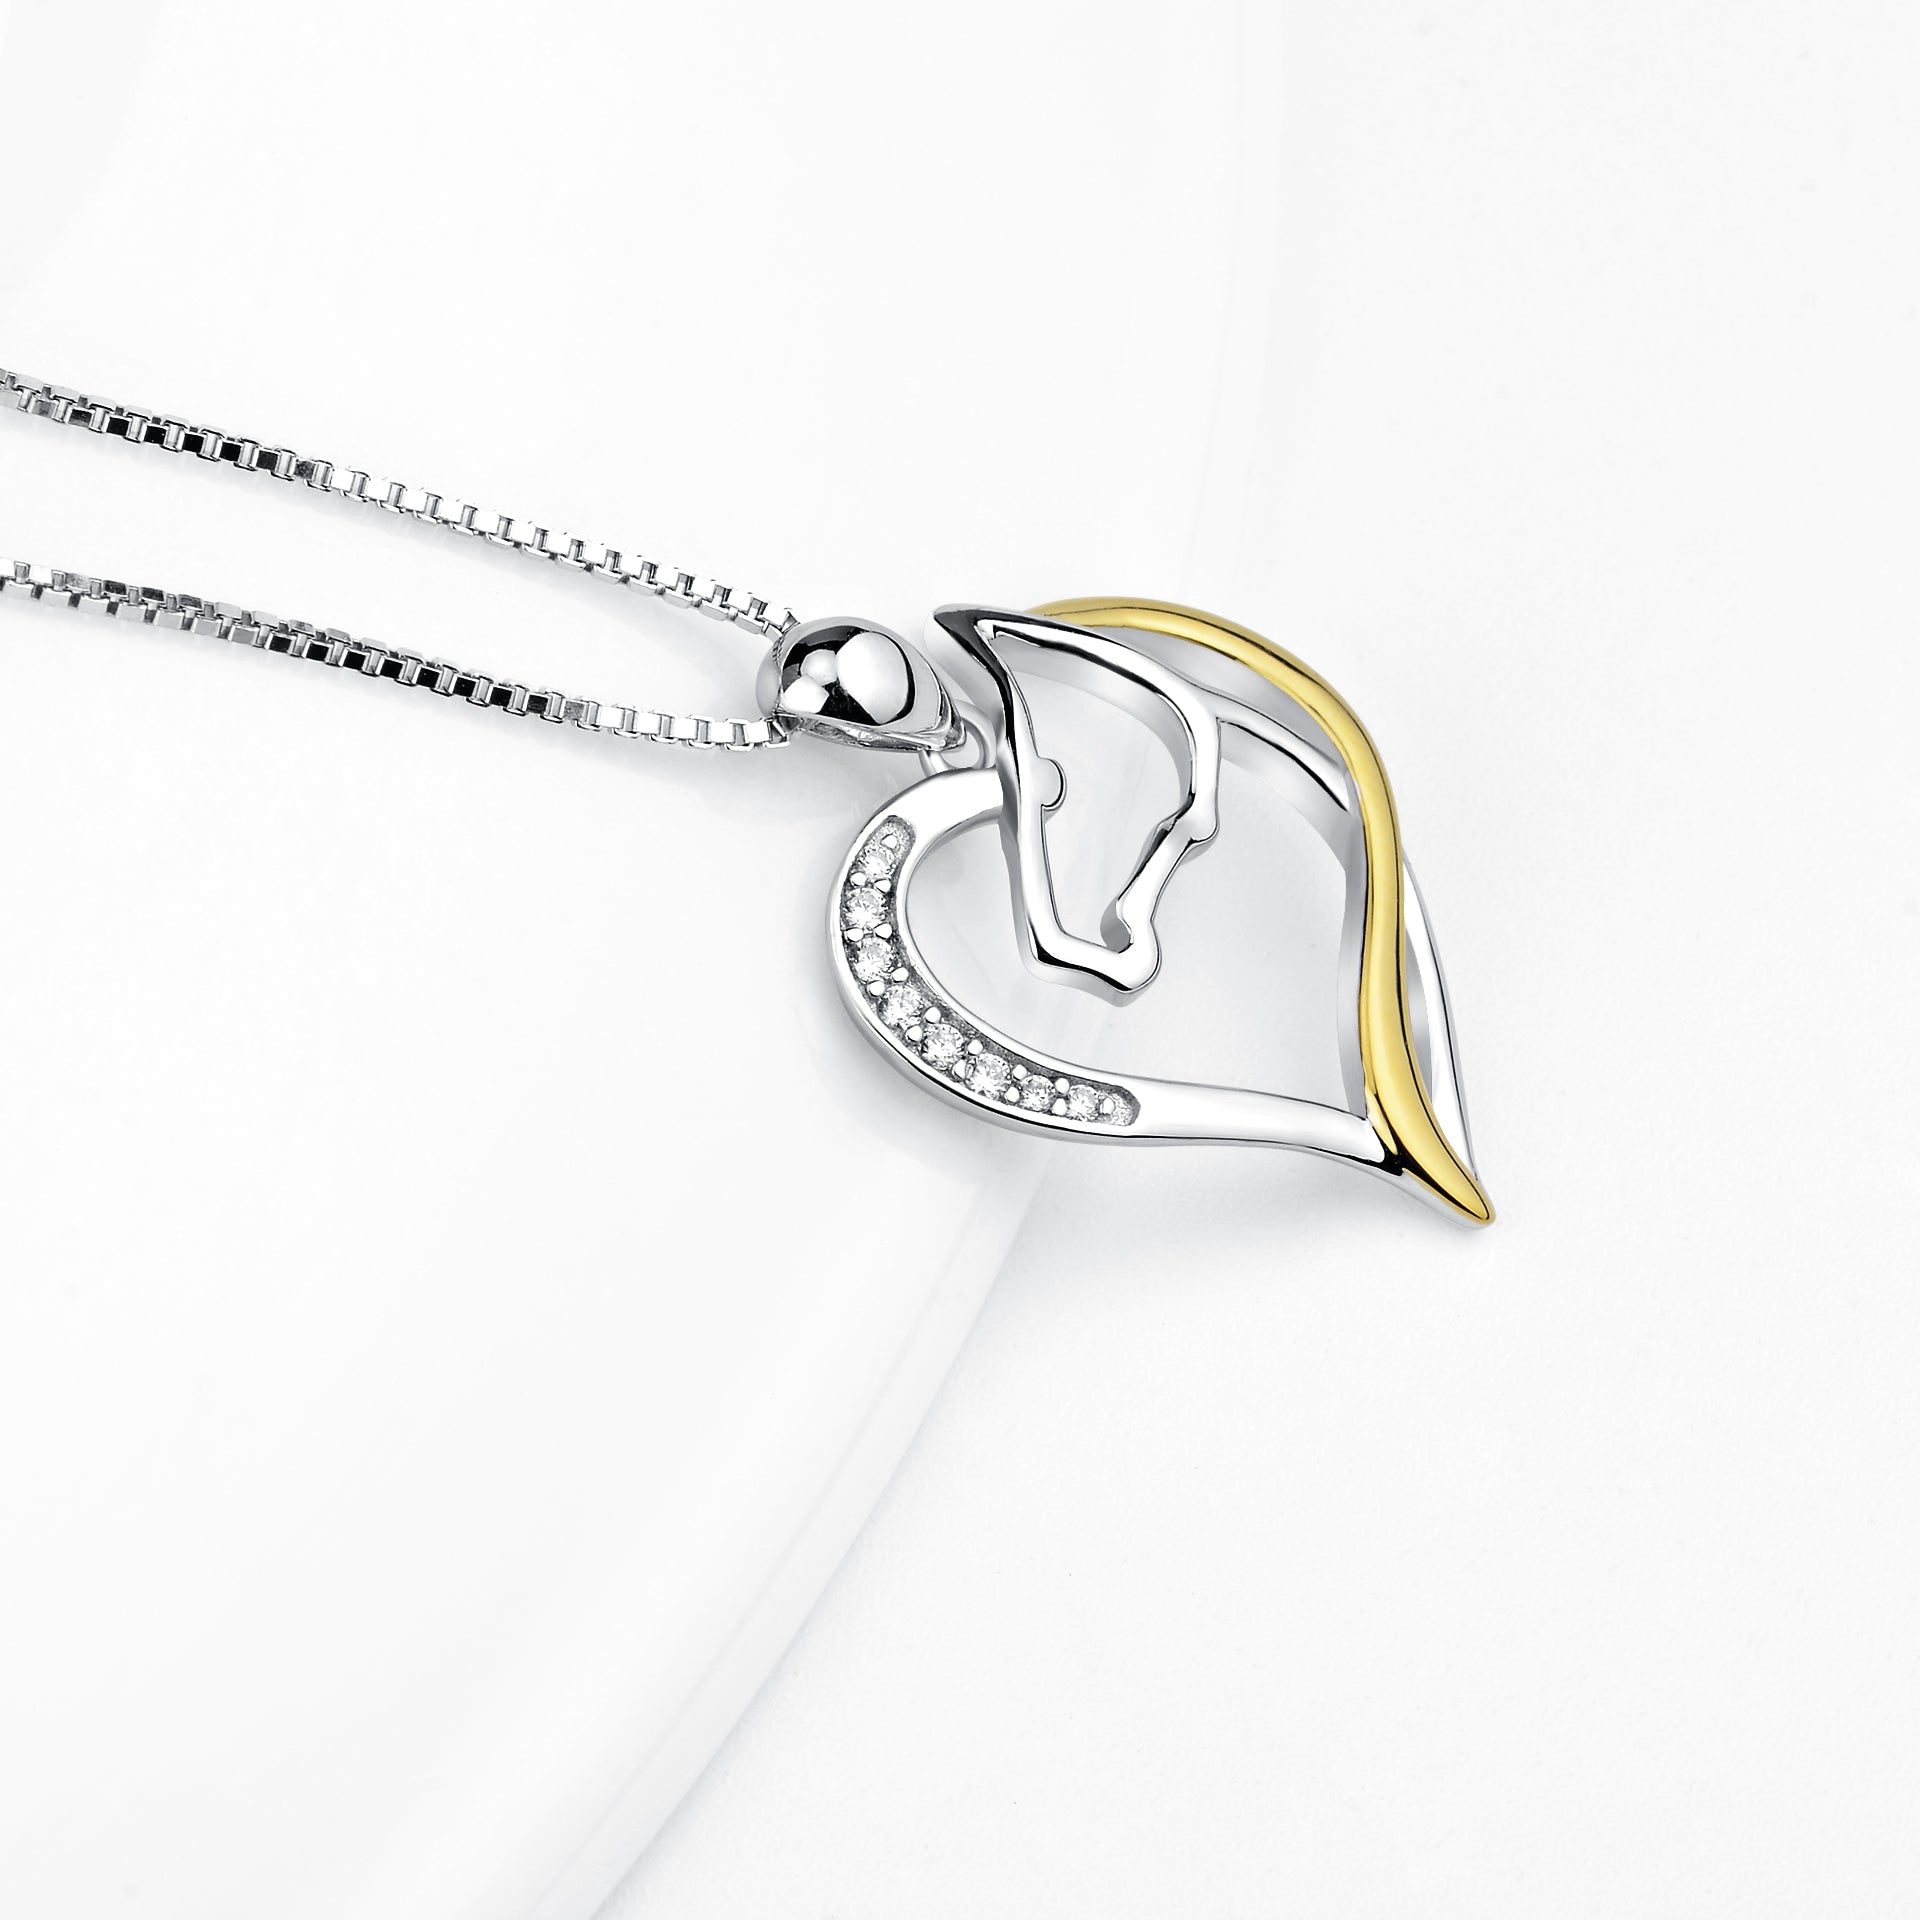 Horse head necklace heart-shaped infinite love sterling silver necklace